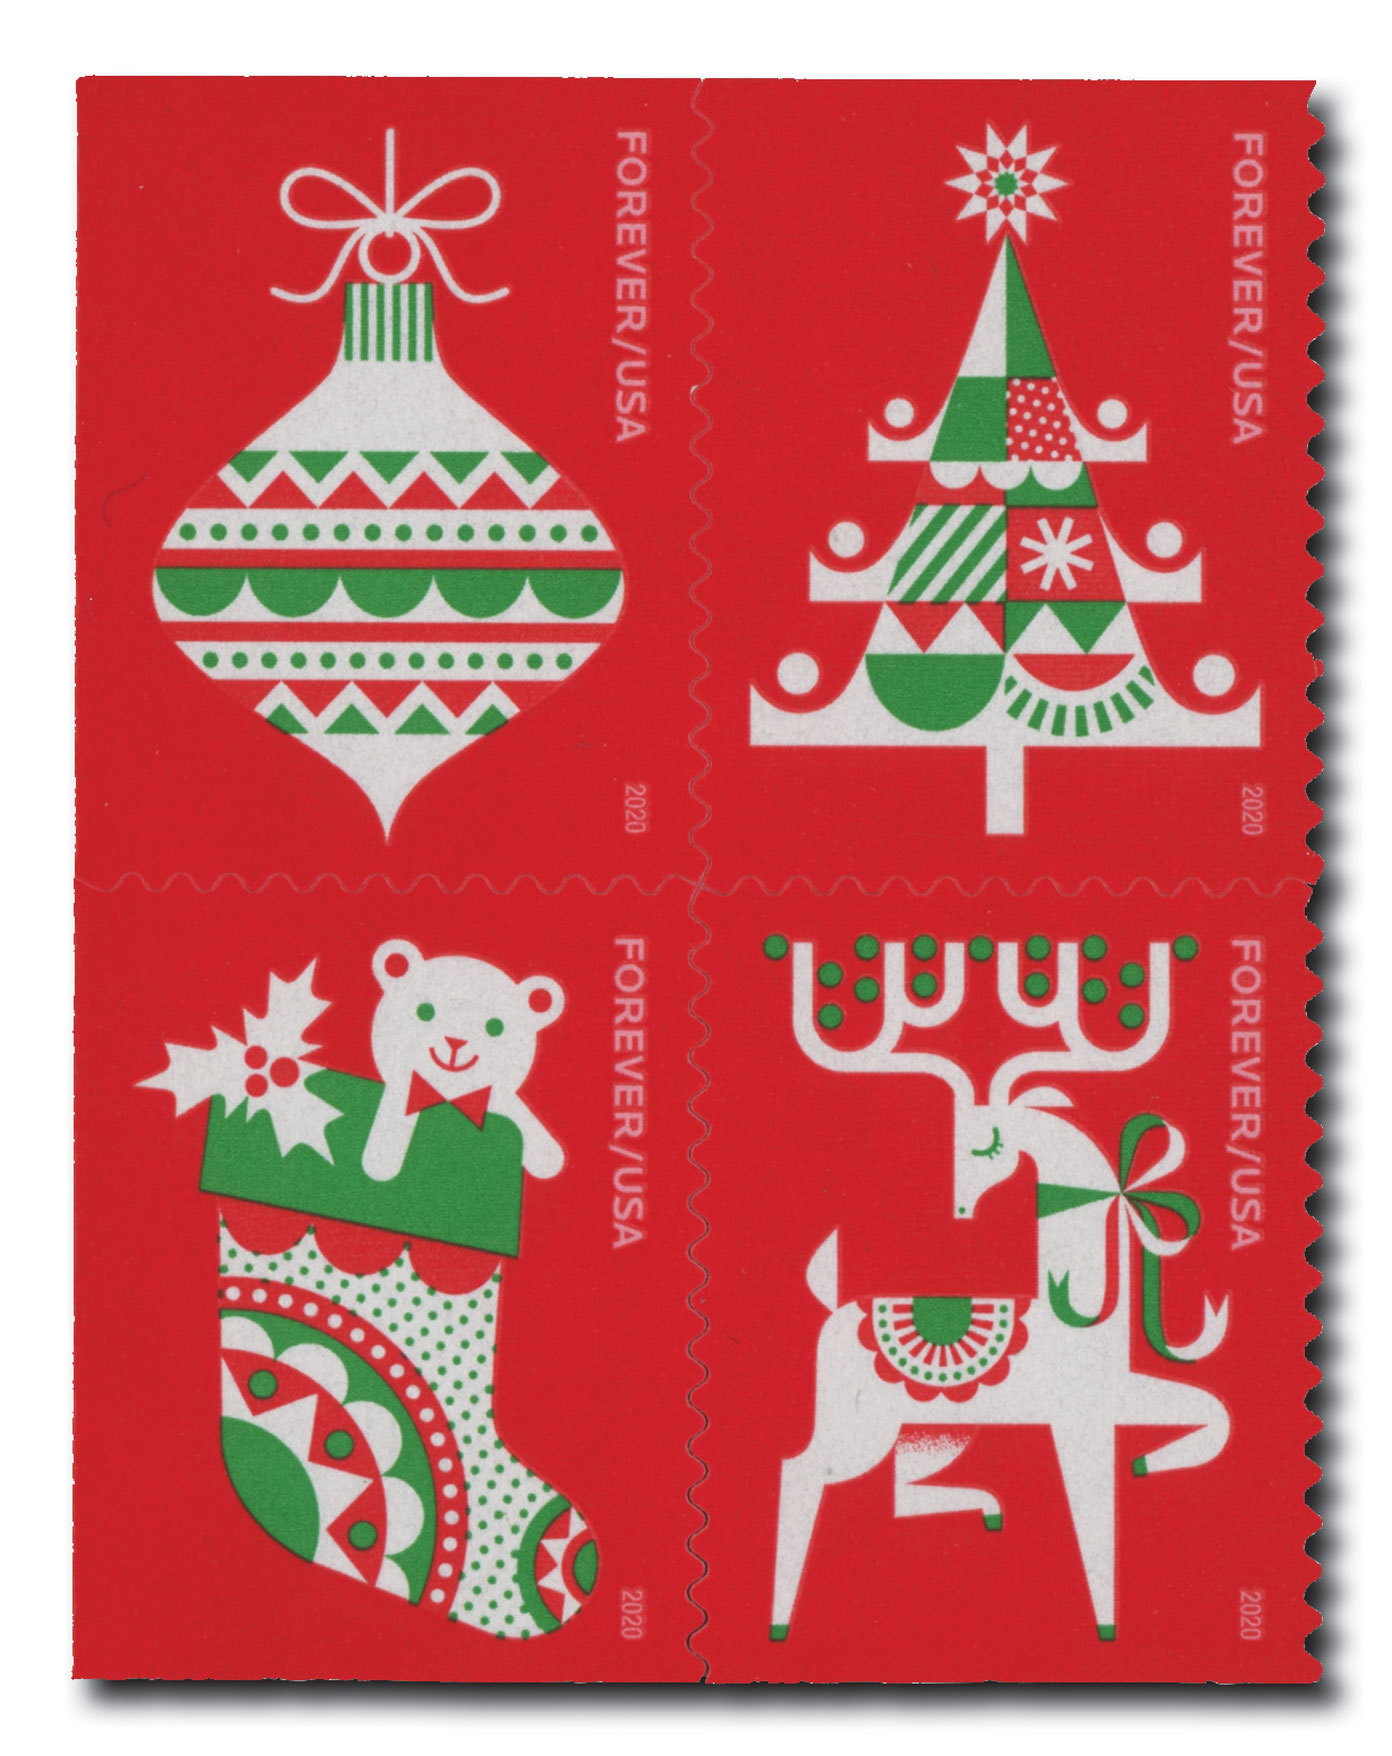 5334 - 2018 First-Class Forever Stamp - Contemporary Christmas: Sparkling  Holidays, Santa Claus and Book, Reading - Mystic Stamp Company